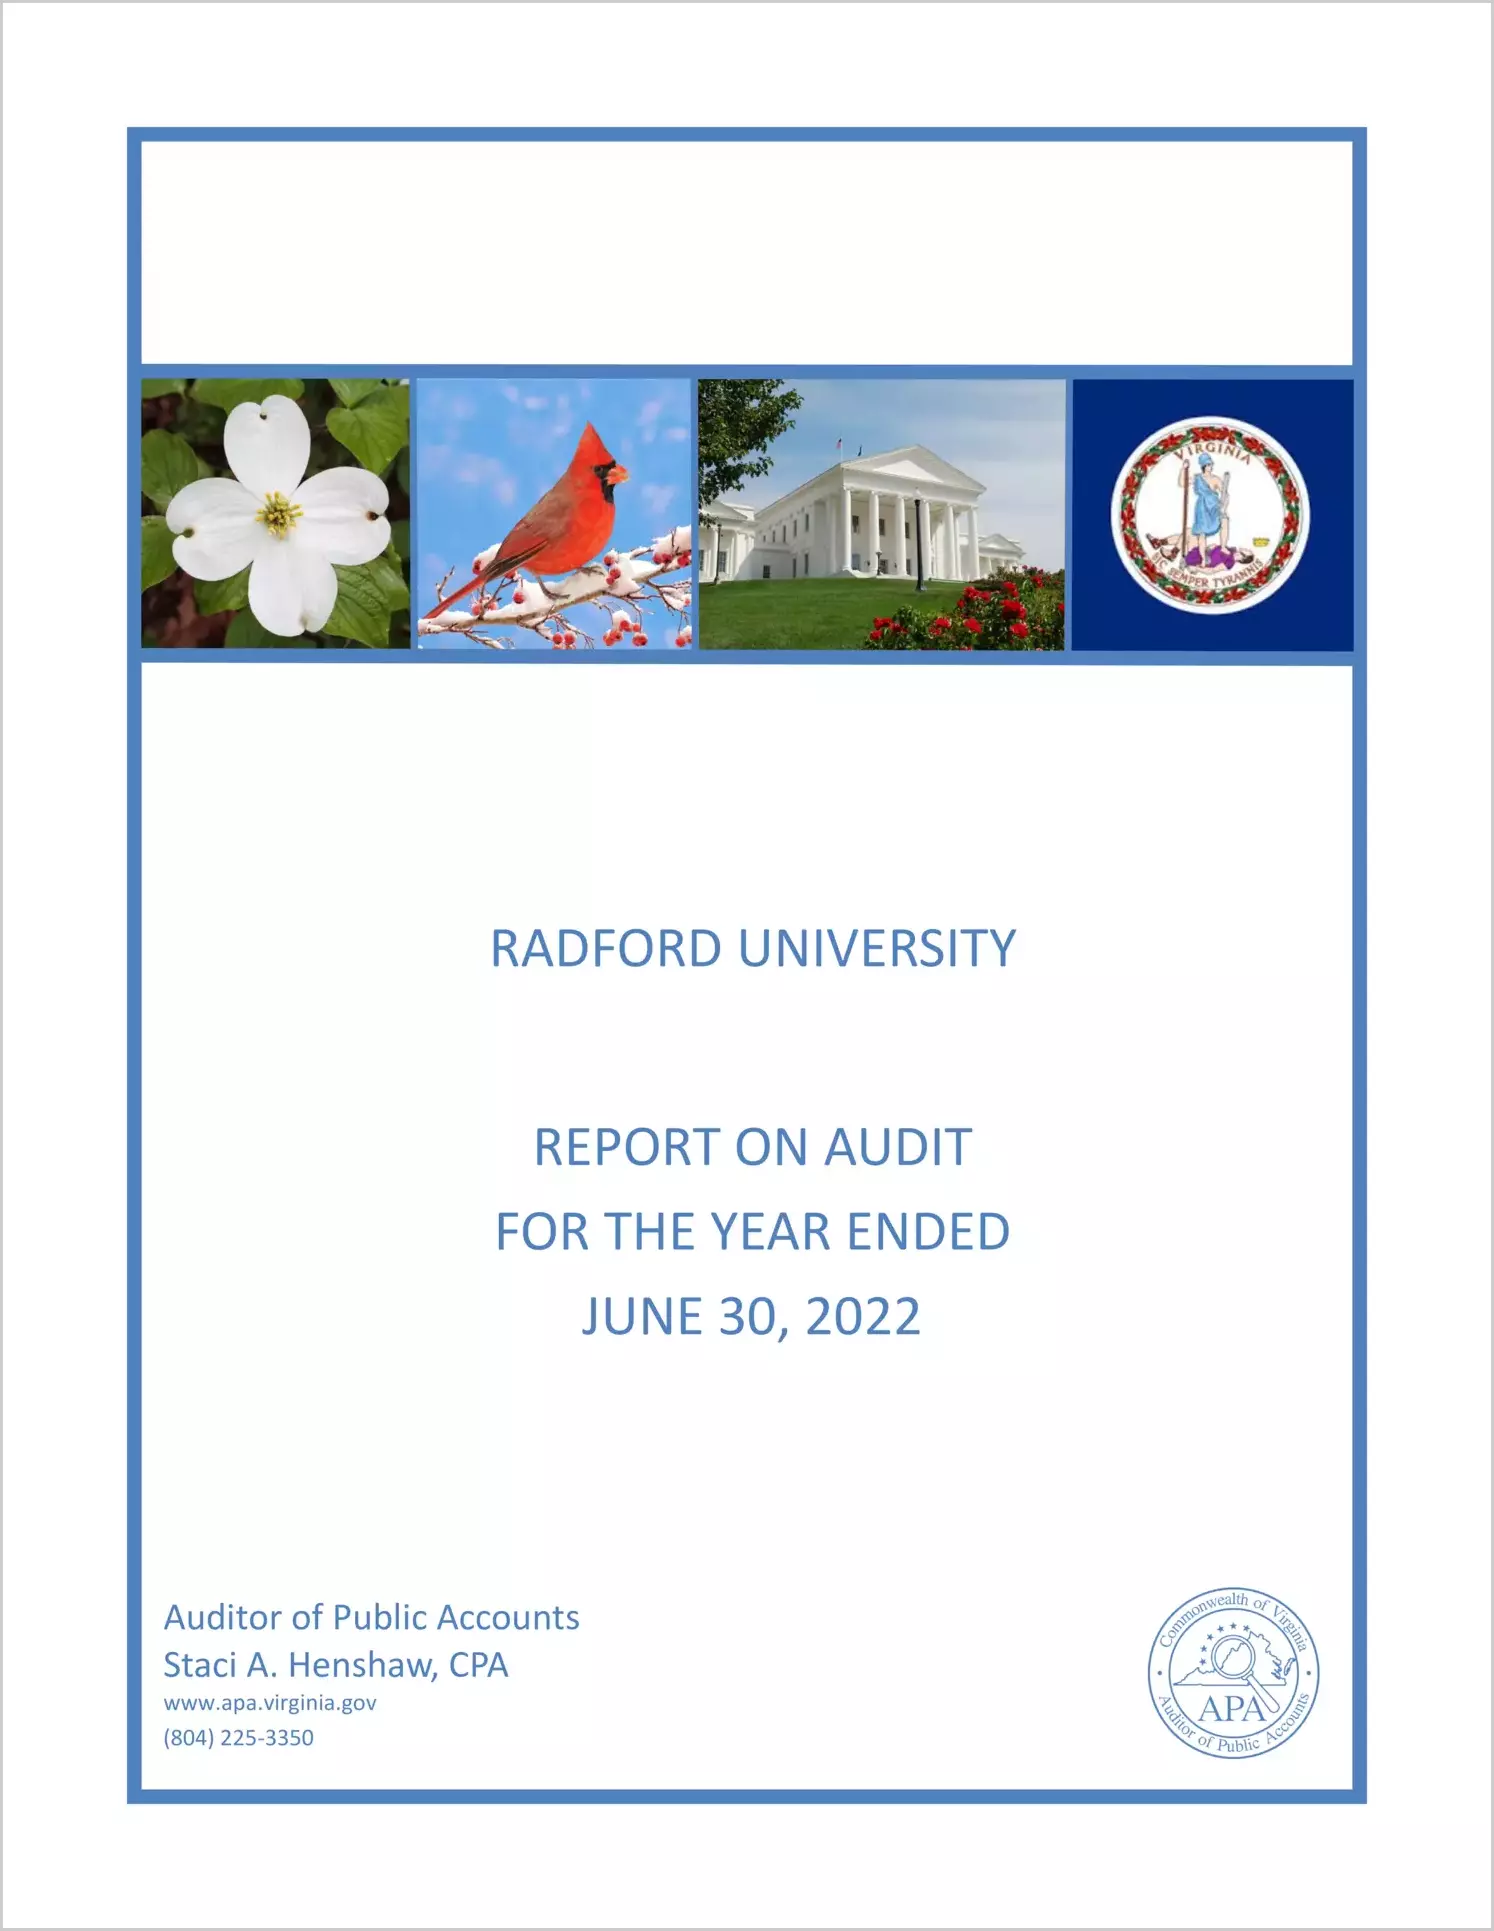 Radford University for the year ended June 30, 2022